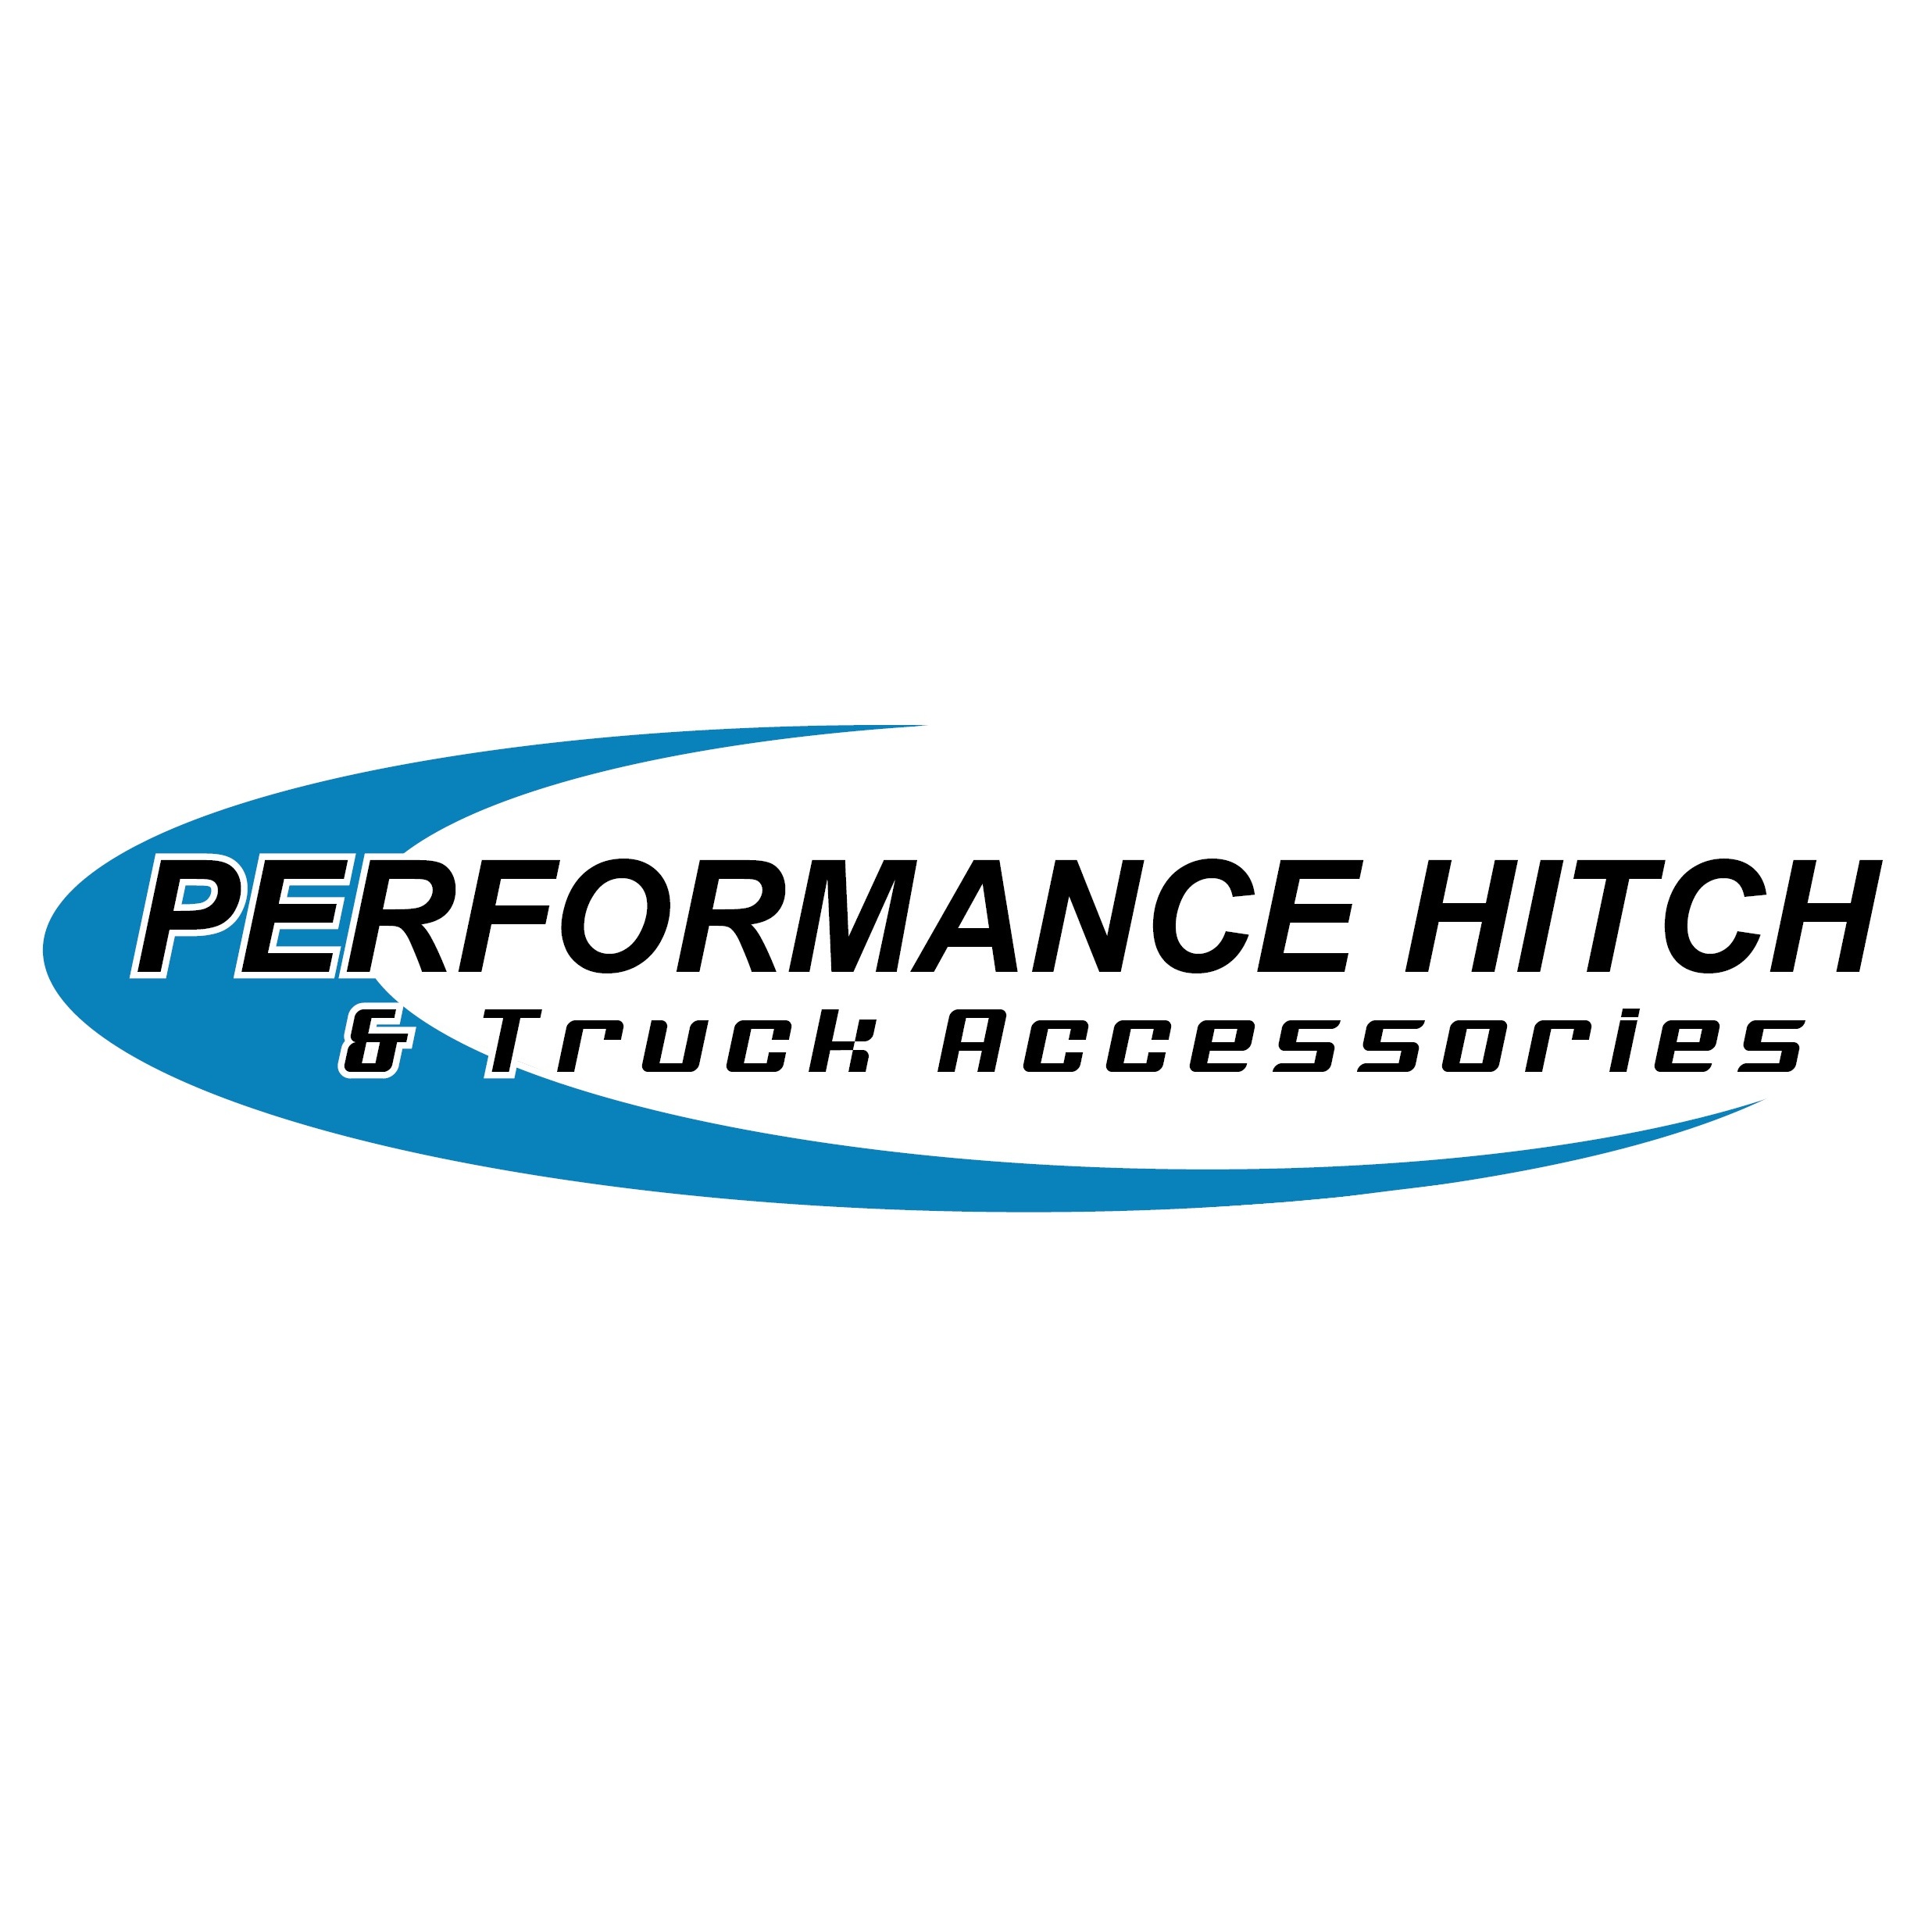 Performance Hitch & Truck Accessories - Mooresville, NC 28117 - (704)799-9005 | ShowMeLocal.com